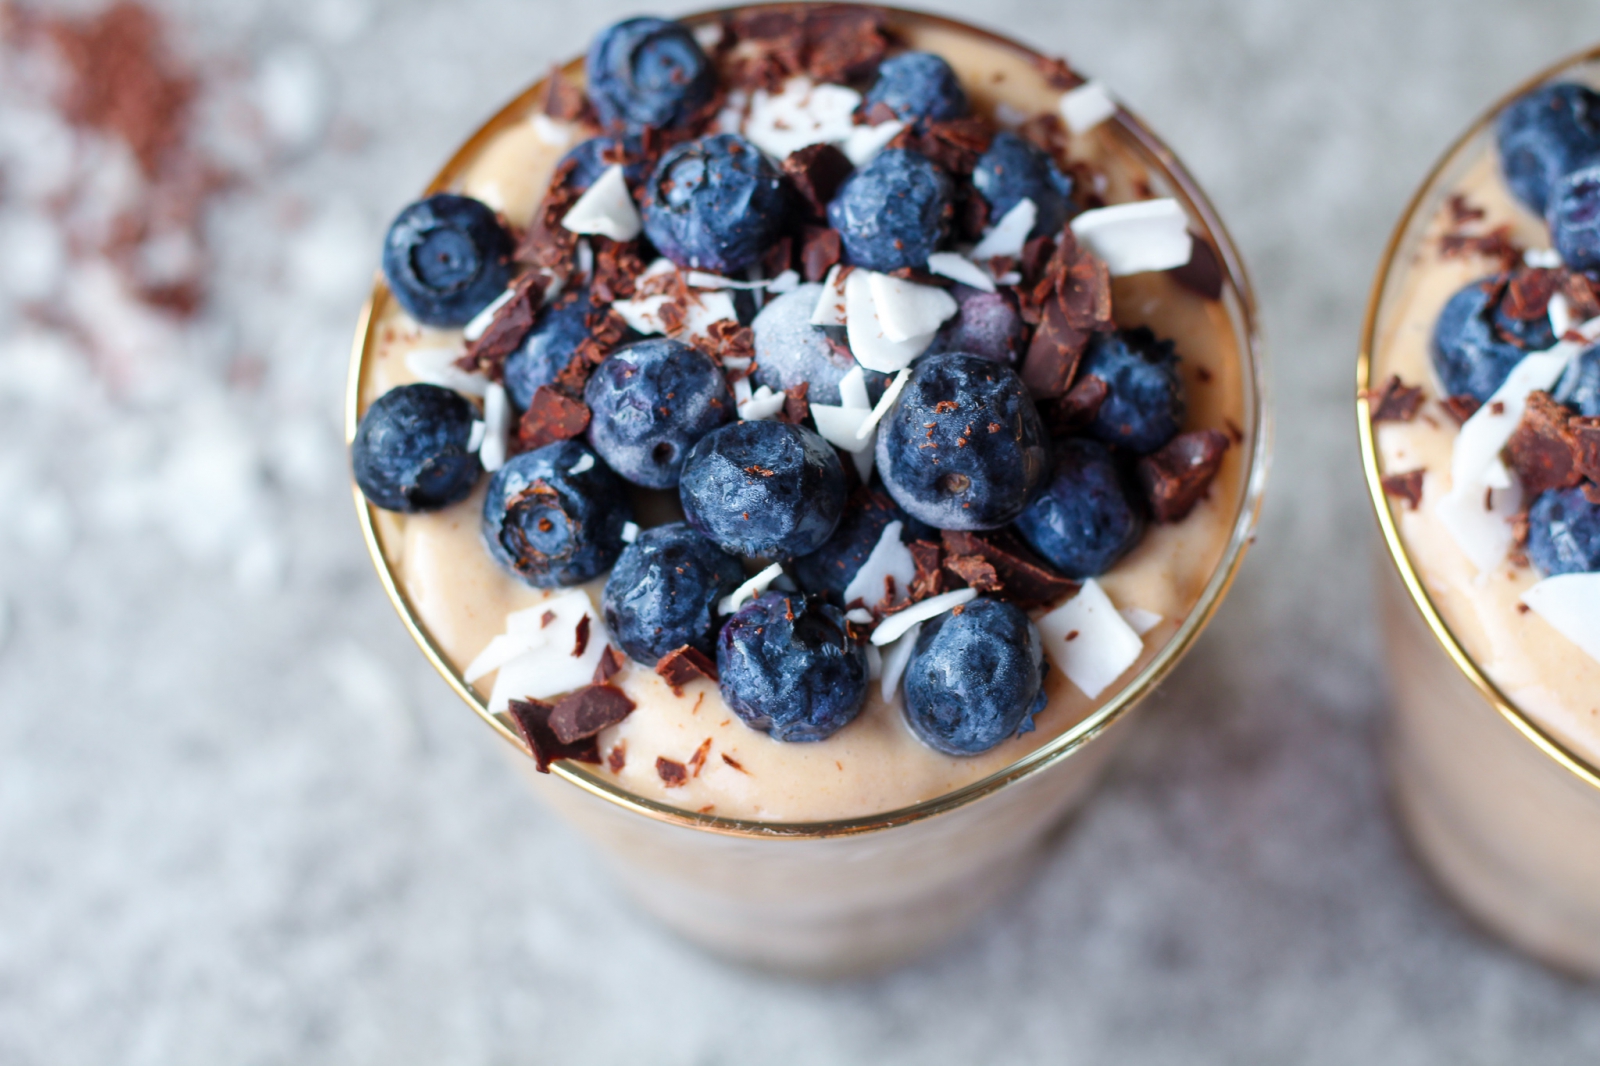 Flat Belly Chocolate Protein Ice Cream or Keto Breakfast Pudding (Dairy Free, Vegan)